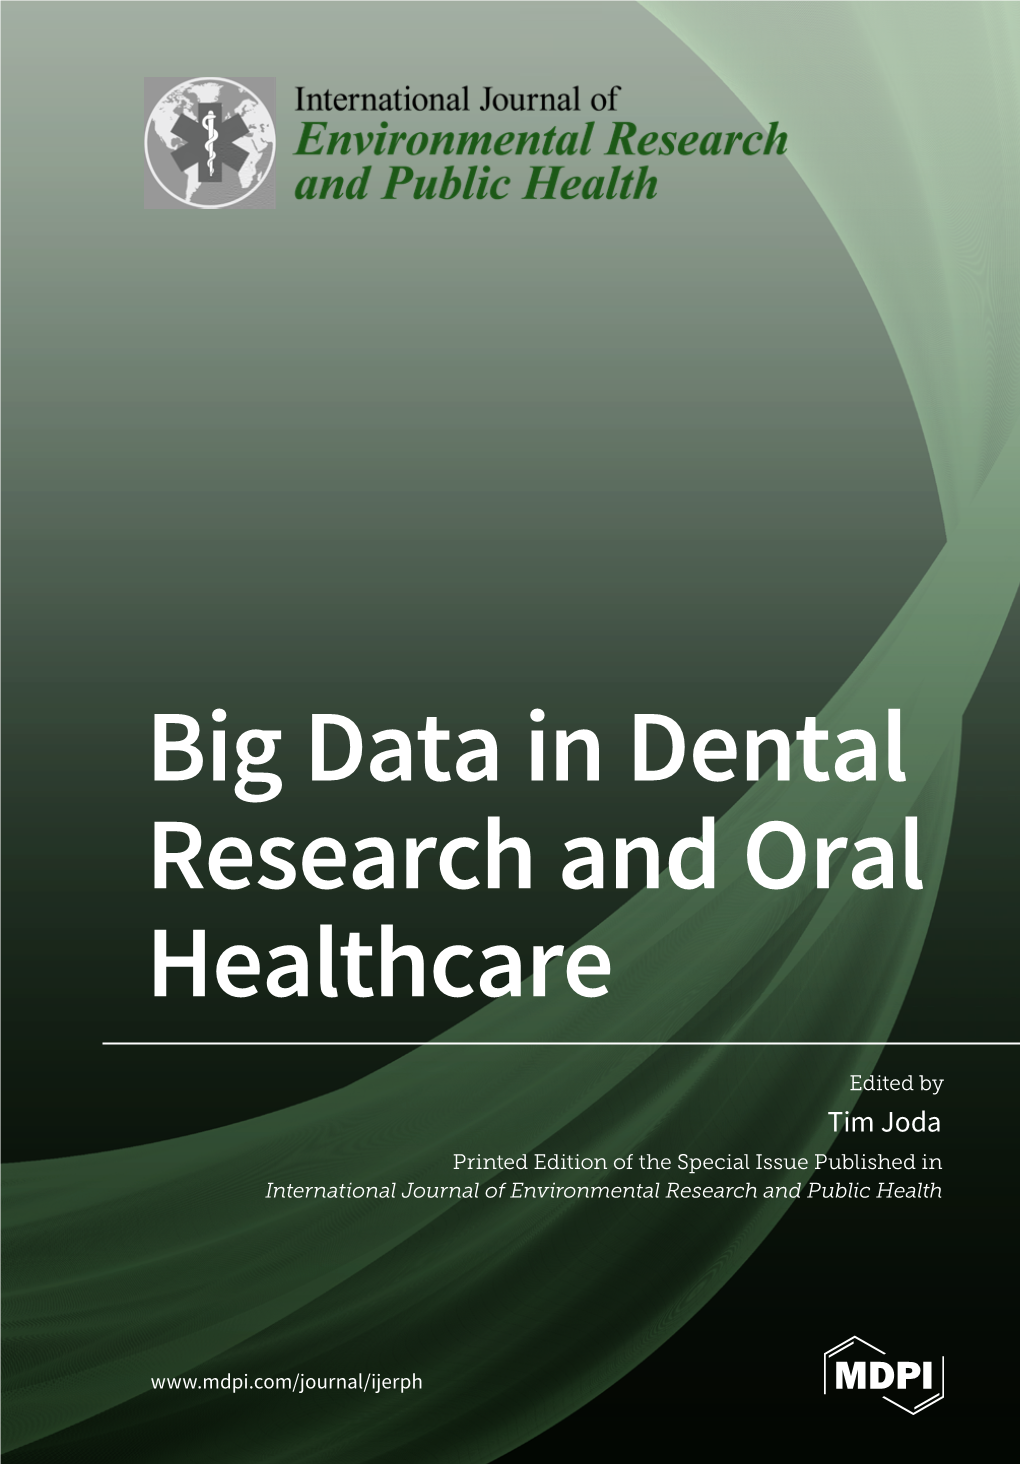 Big Data in Dental Research and Oral Healthcare